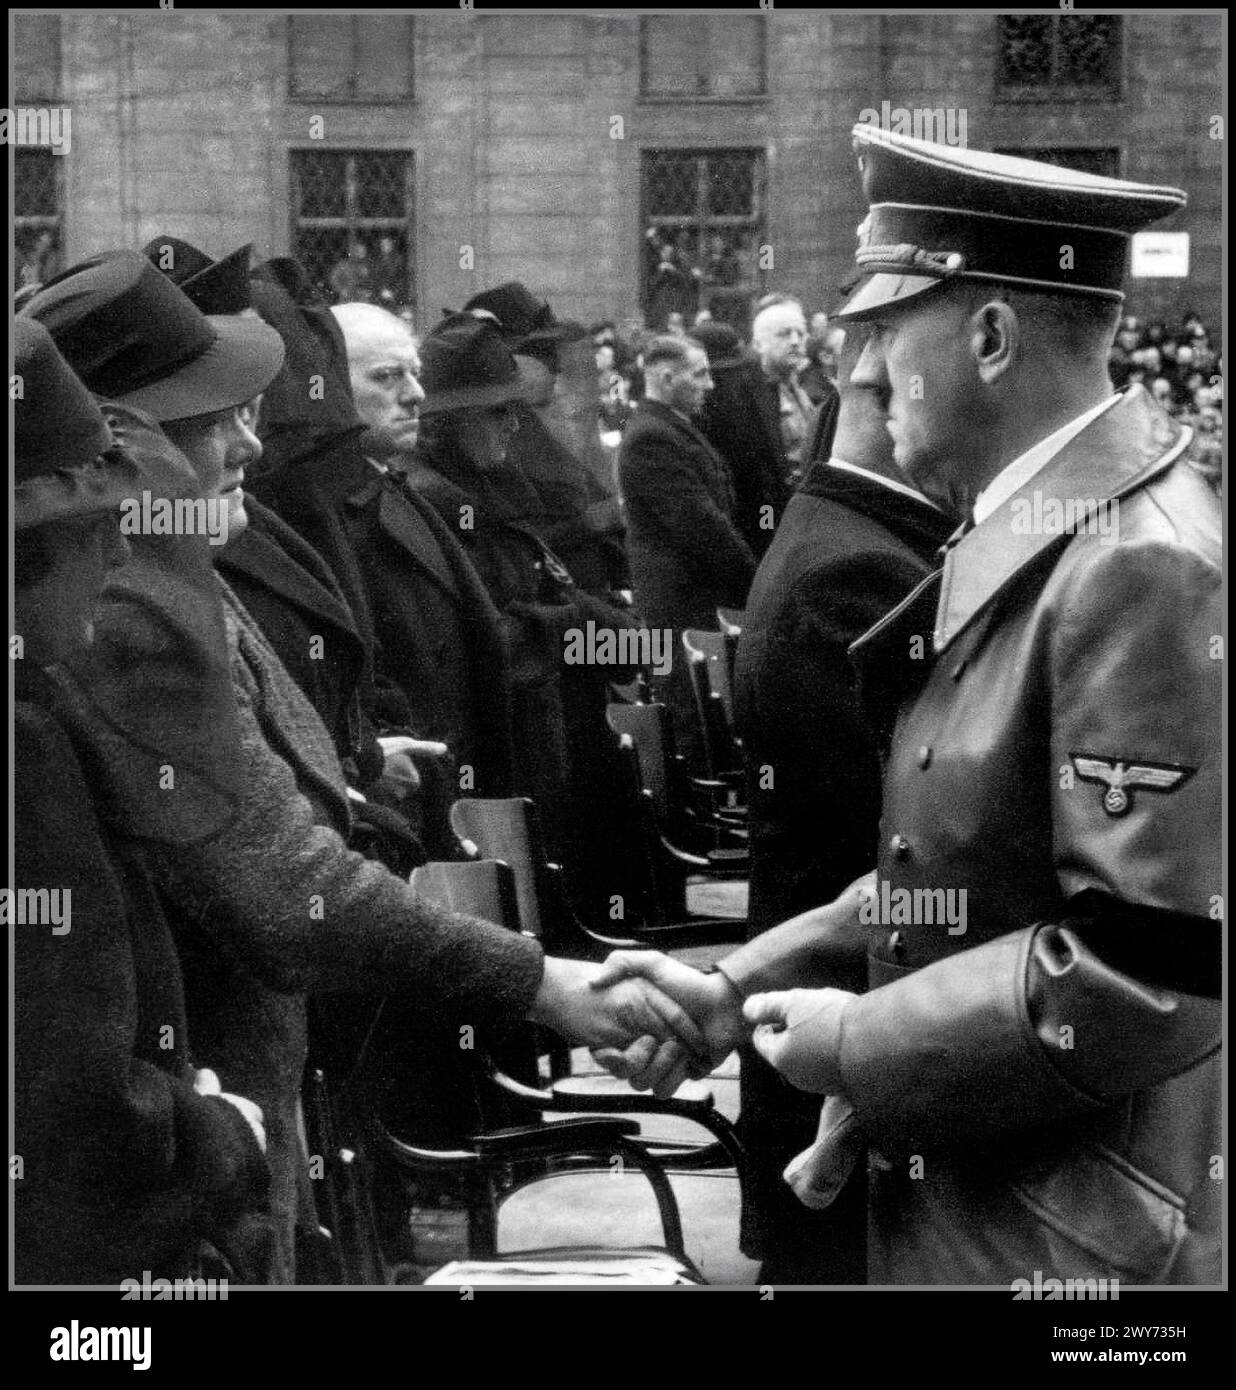 Adolf Hitler wearing a black armband expresses condolences to the families of those killed in the explosion in the Munich beer hall 'Bürgerbräukeller'. 1939 Nazi Germany.  Johann Georg Elser 4 January 1903 – 9 April 1945) was a German worker who planned and carried out an elaborate assassination attempt on Adolf Hitler and other high-ranking Nazi leaders on 8 November 1939 at the Bürgerbräukeller in Munich (known as the Bürgerbräukeller Bombing). Elser constructed and placed a bomb near the platform from which Hitler was to deliver a speech. It did not kill Hitler Stock Photo